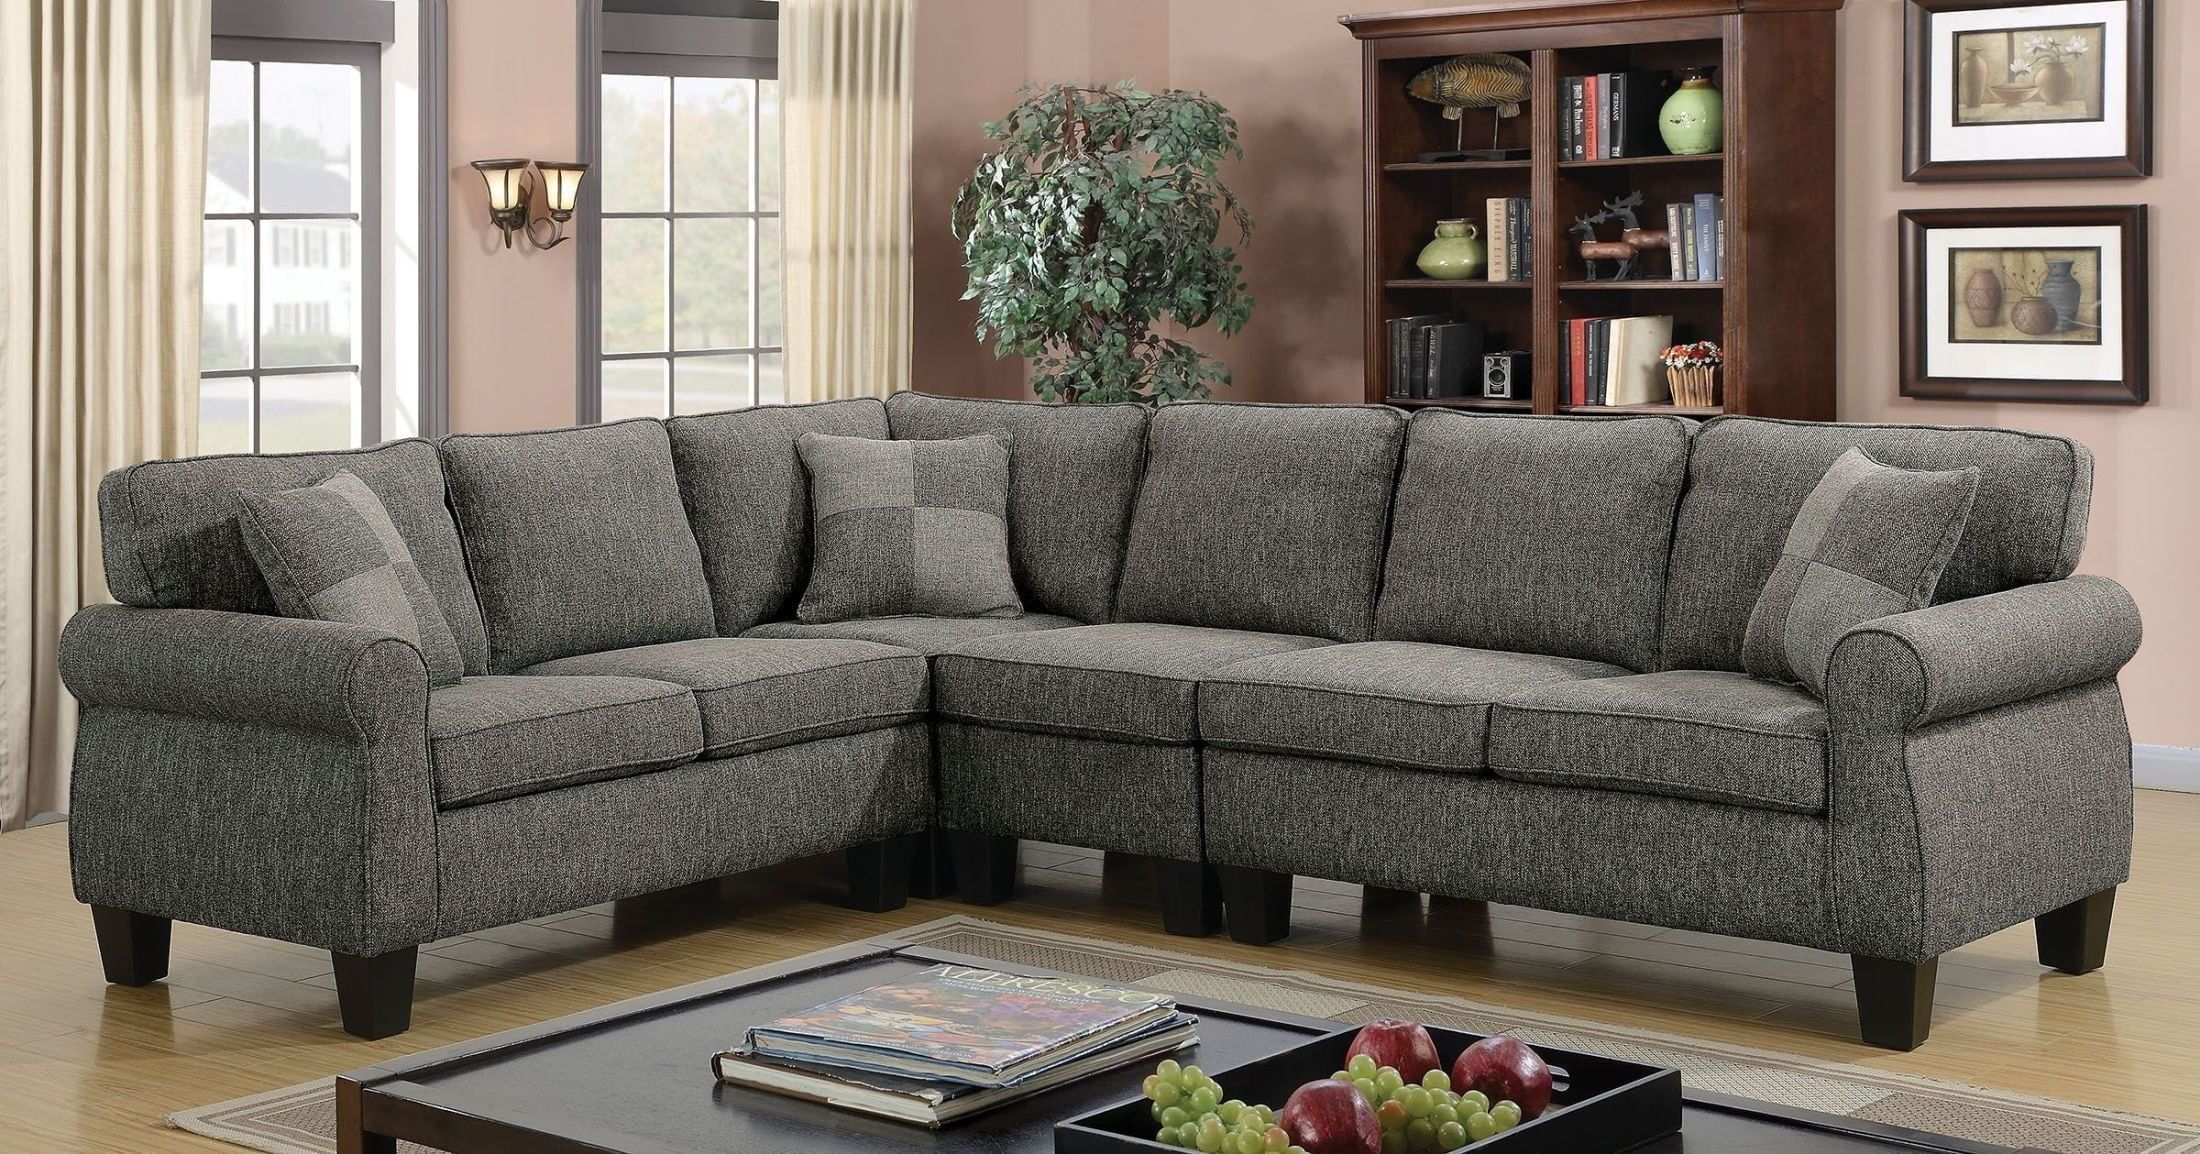 Rhian Dark Gray Sectional From Furniture Of America | Coleman Furniture For Dark Gray Sectional Sofas (Gallery 3 of 20)